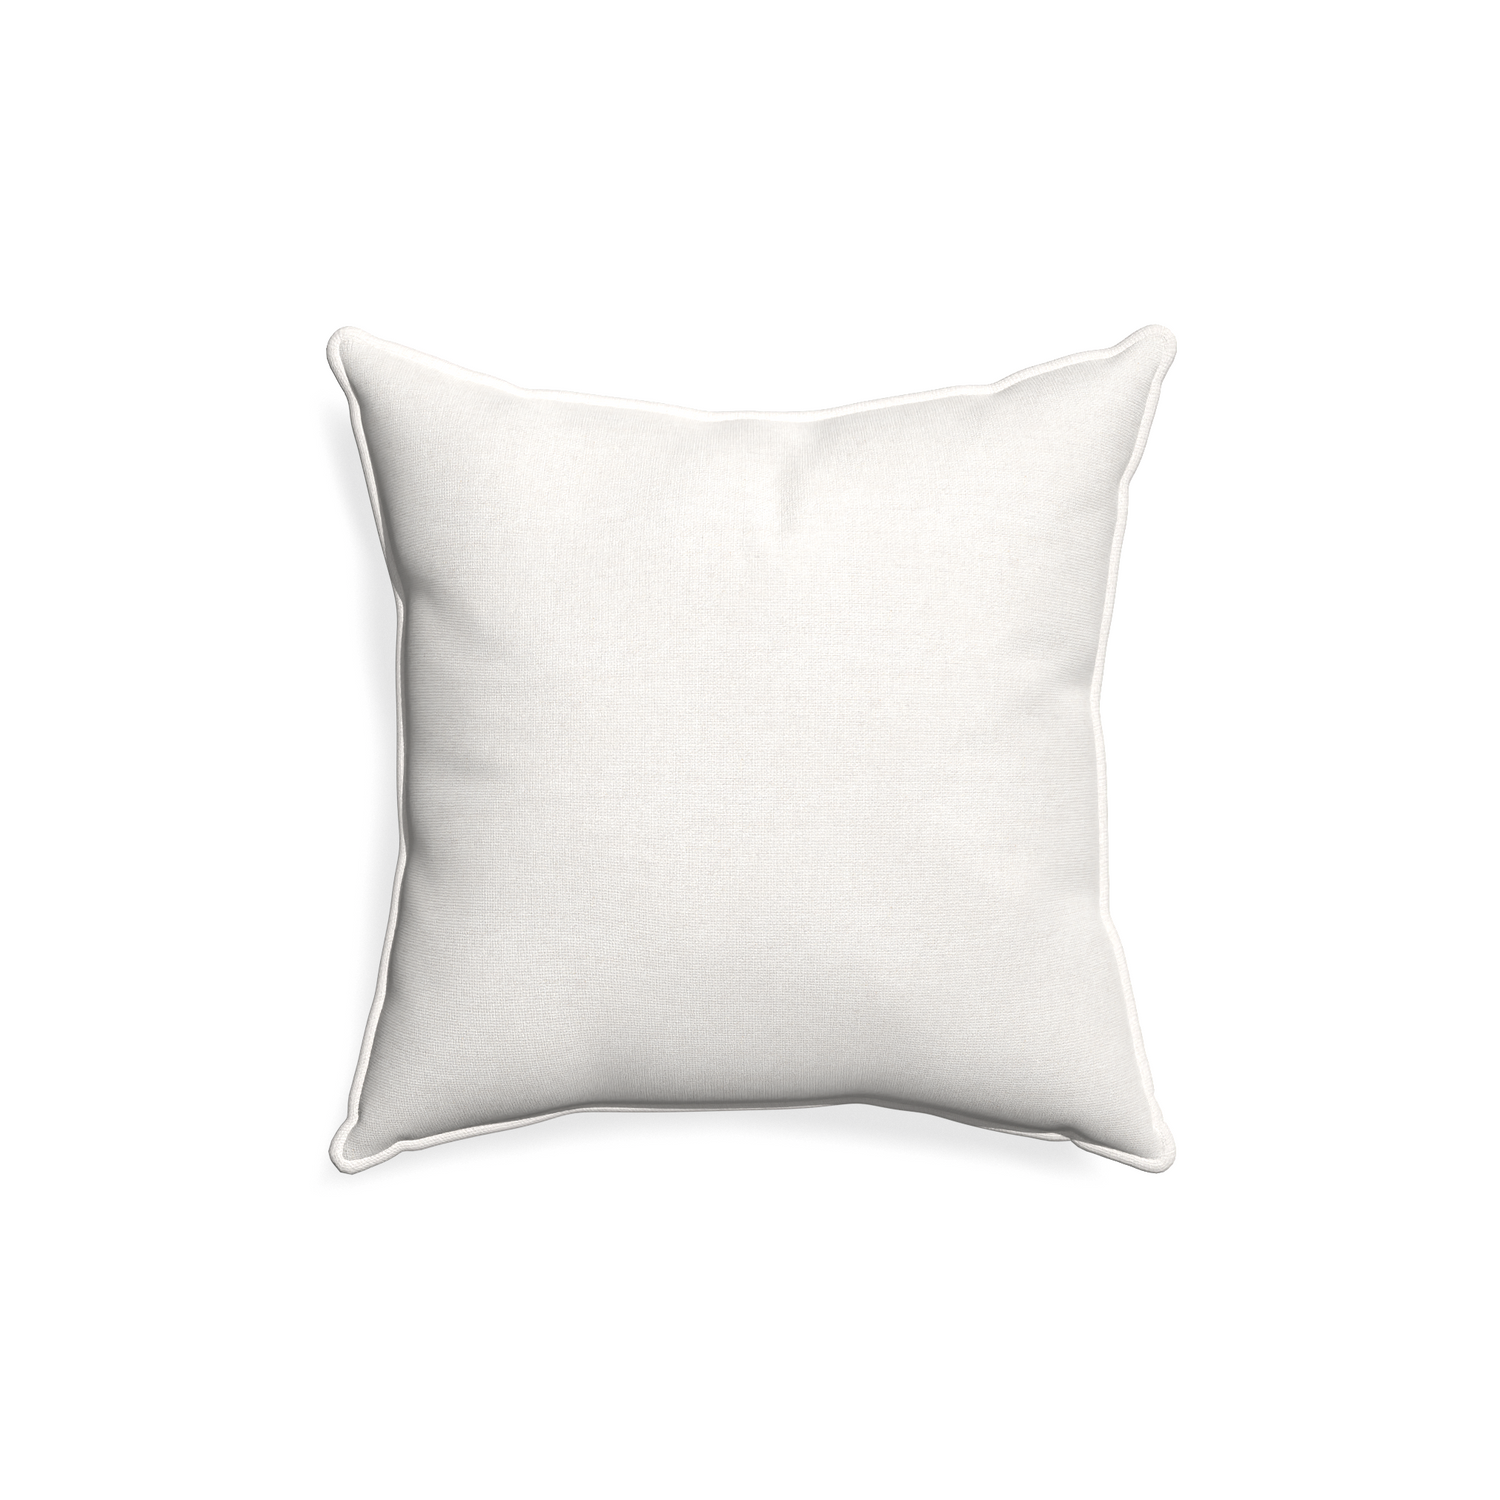 18-square flour custom pillow with snow piping on white background